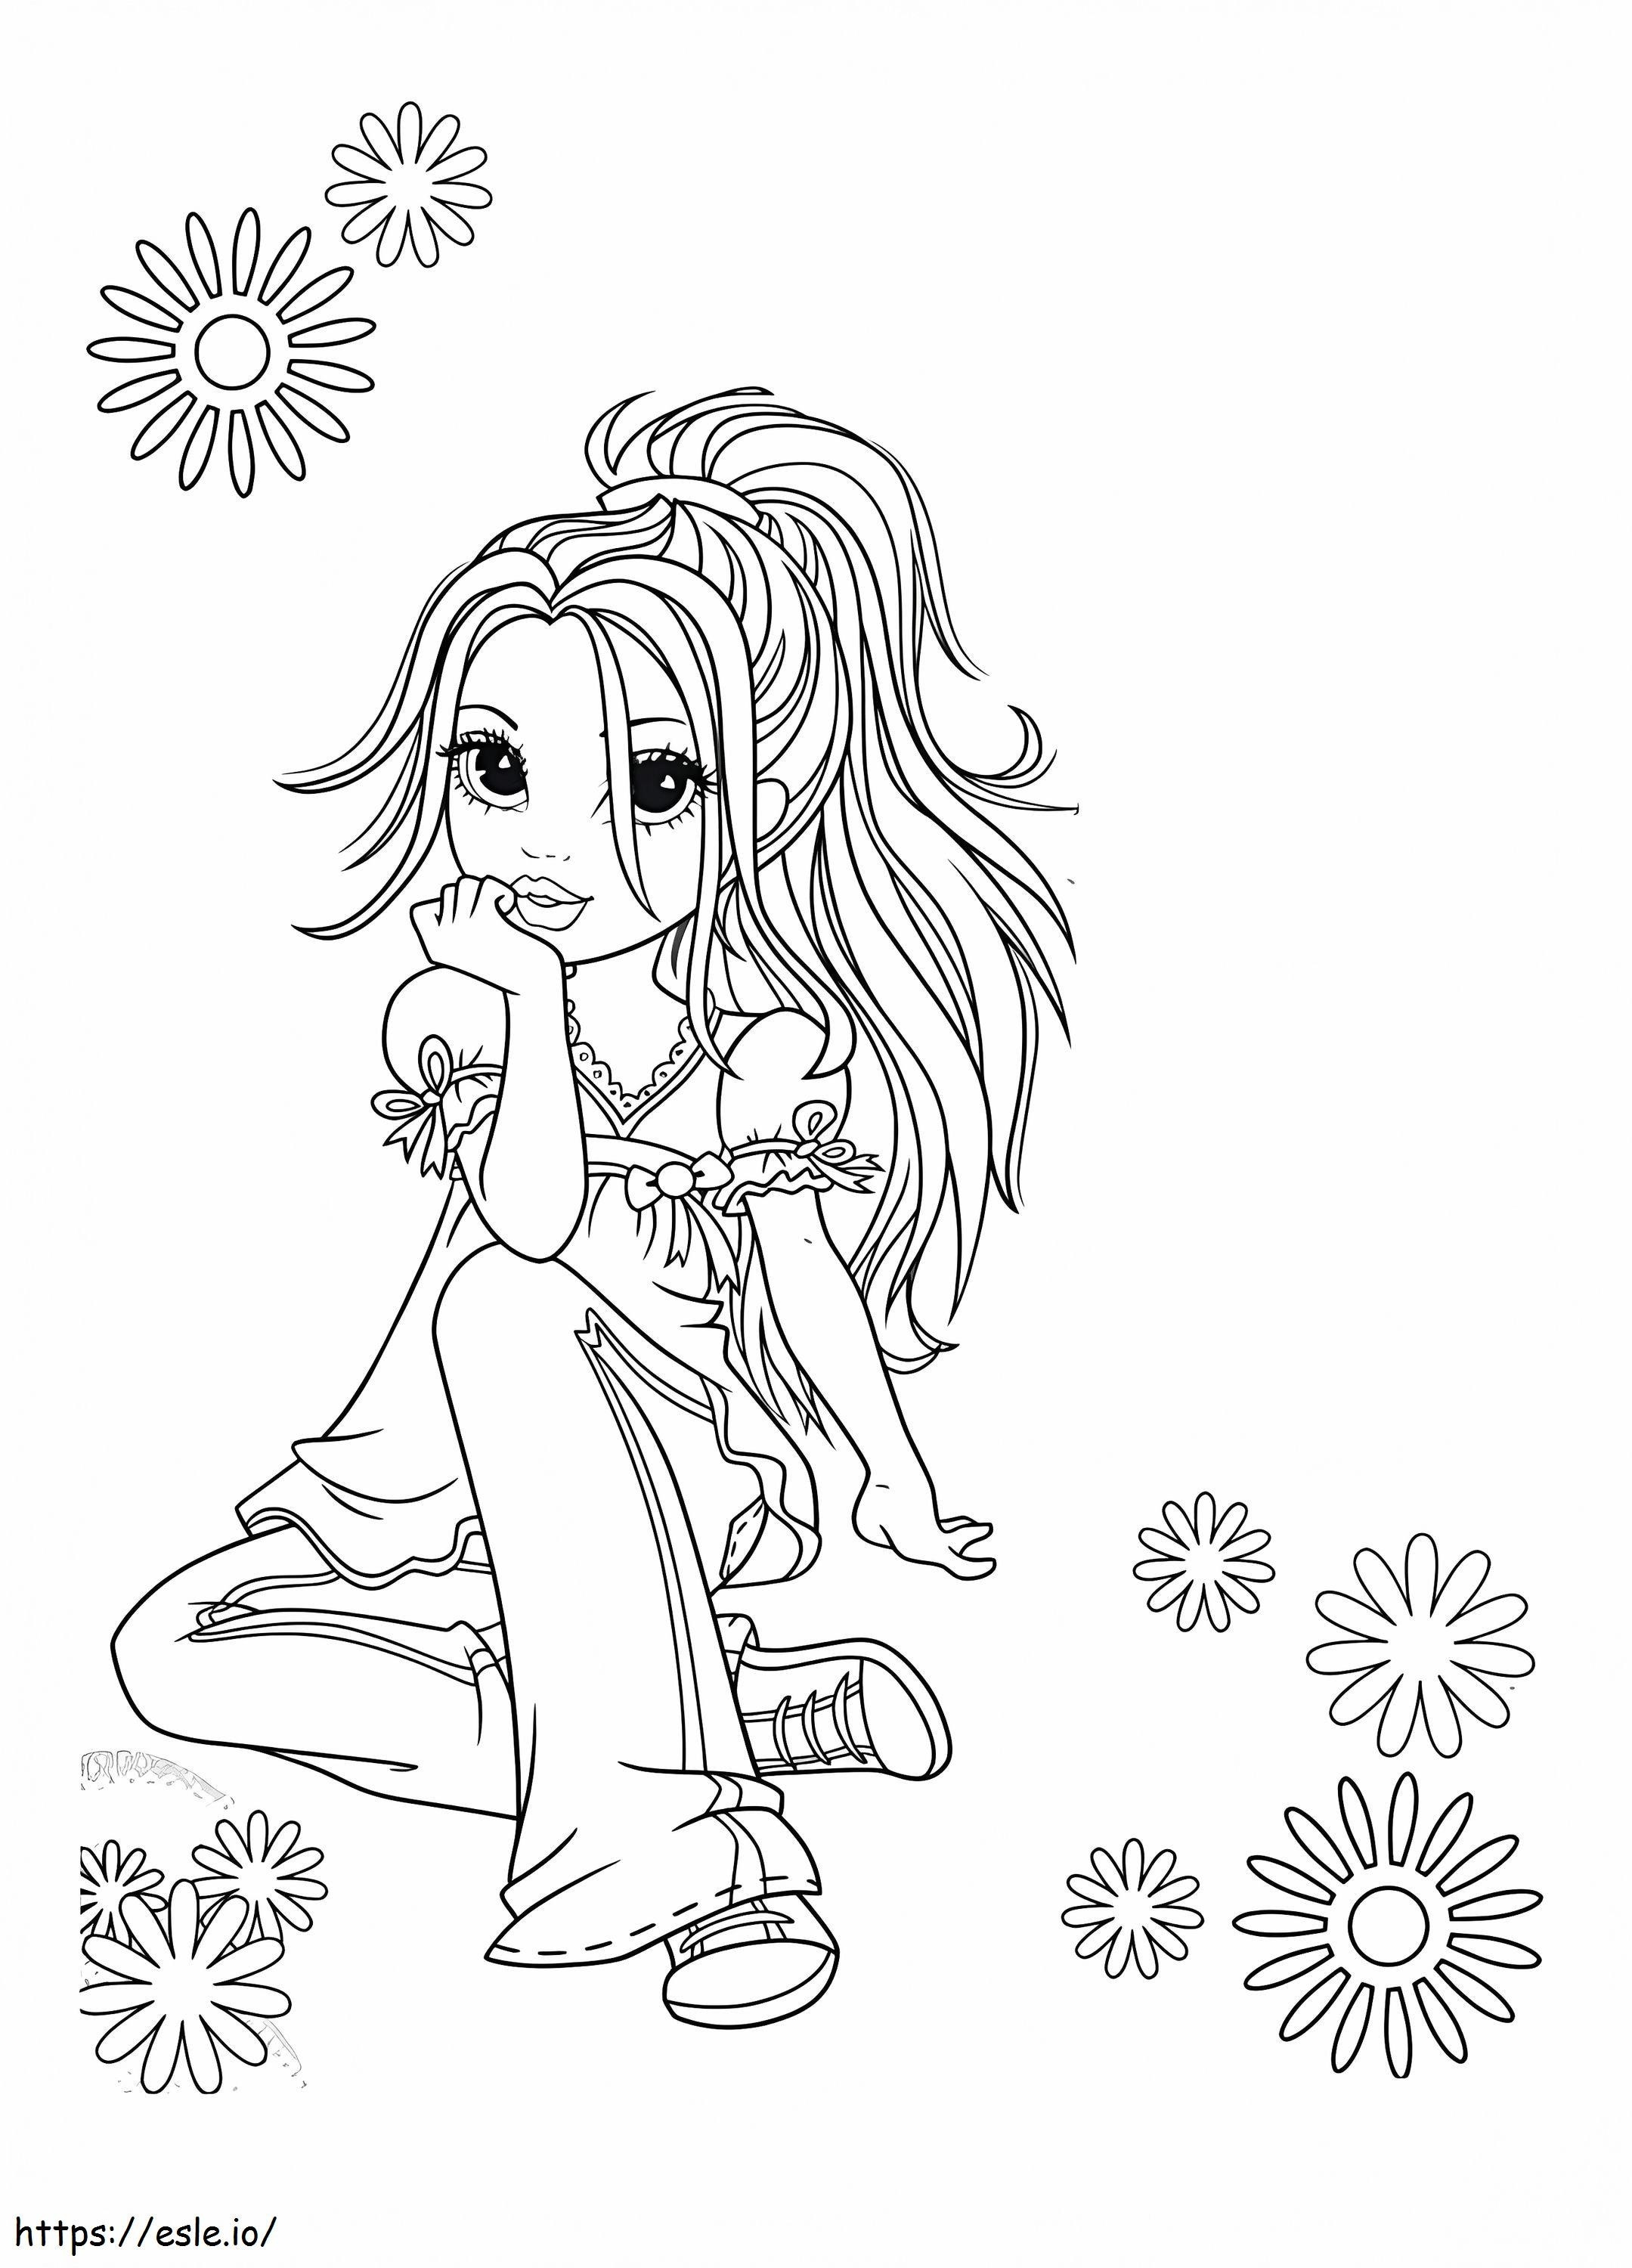 Moxie Girlz 8 coloring page